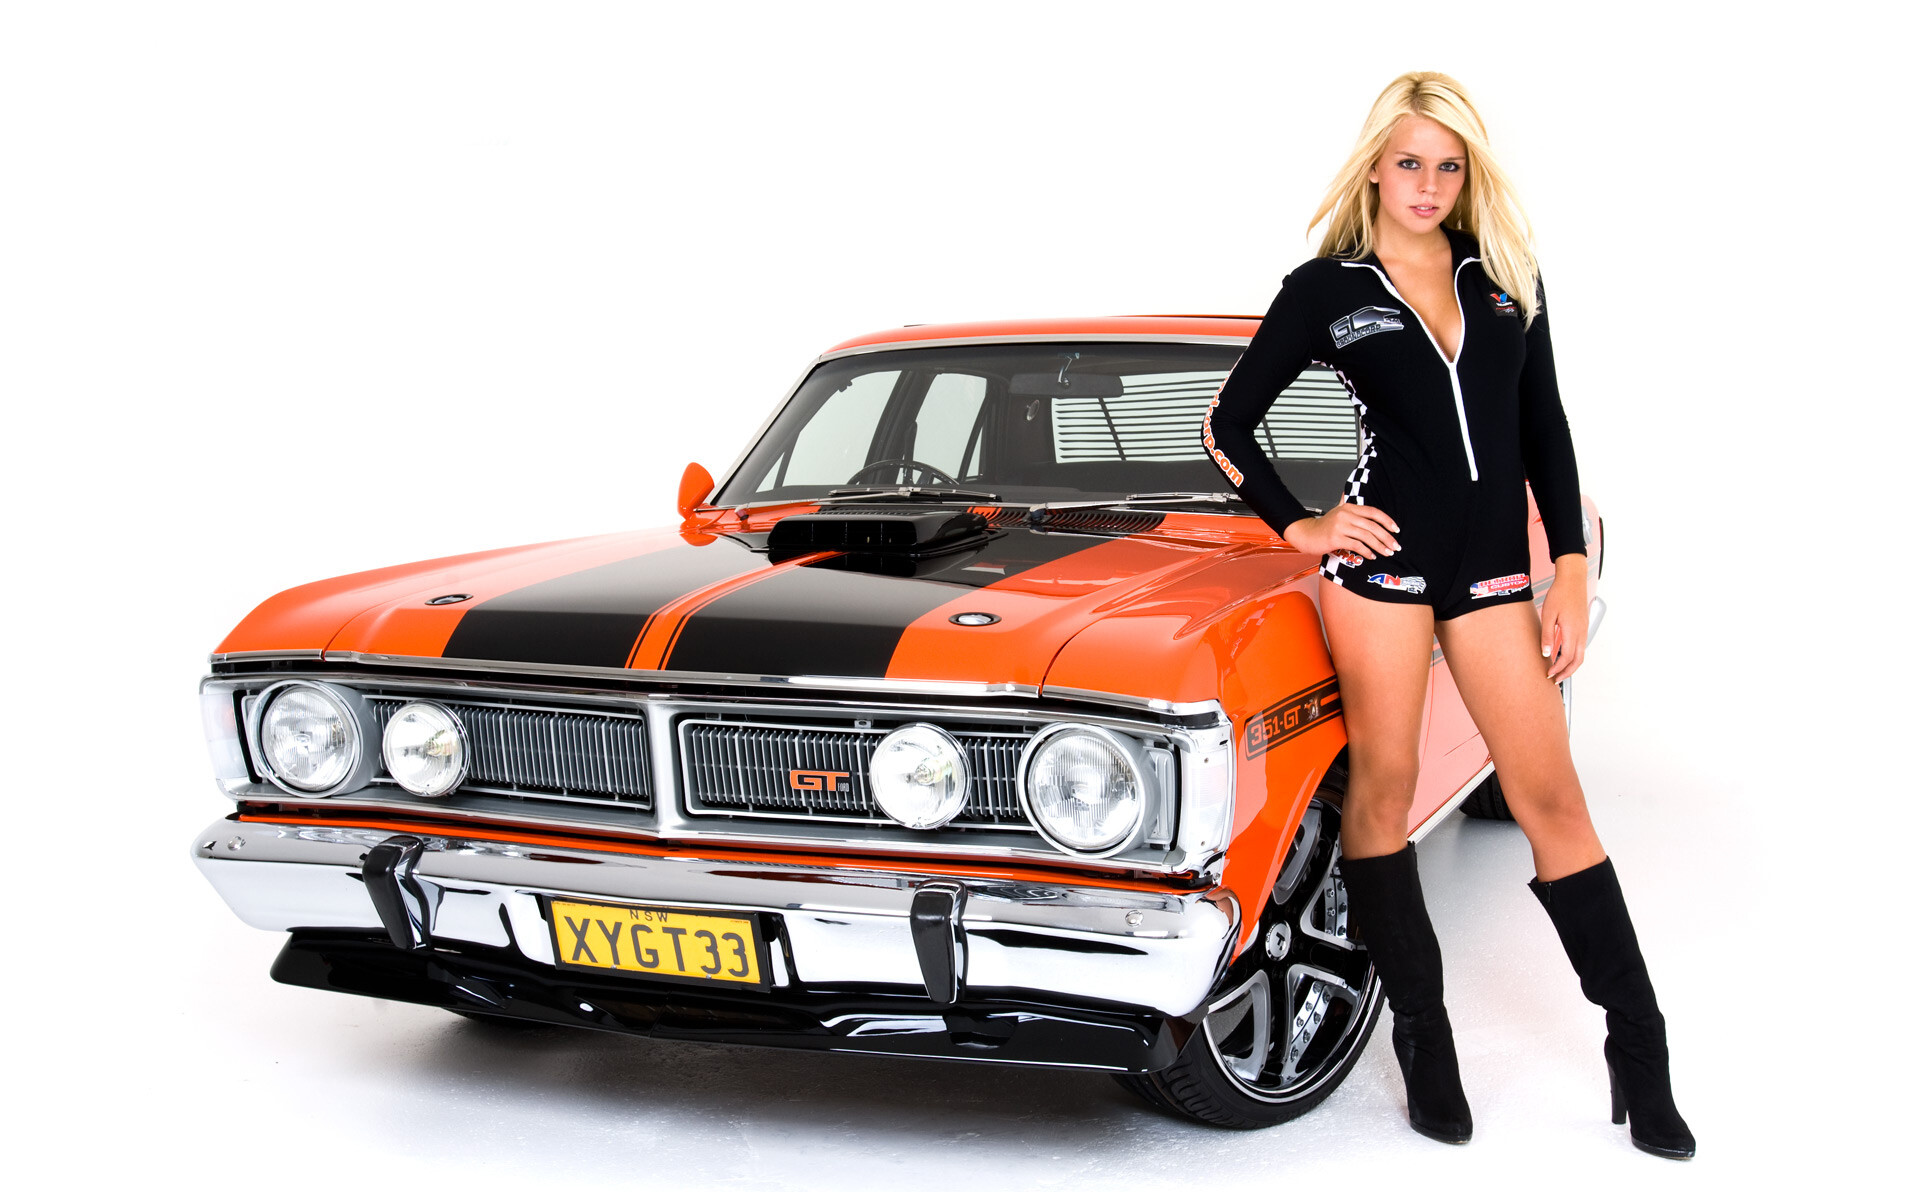 Girls and Muscle Cars: 1972 Ford Falcon 351 GT, An automobile produced by Ford Australia, Grille, Sports sedan. 1920x1200 HD Wallpaper.